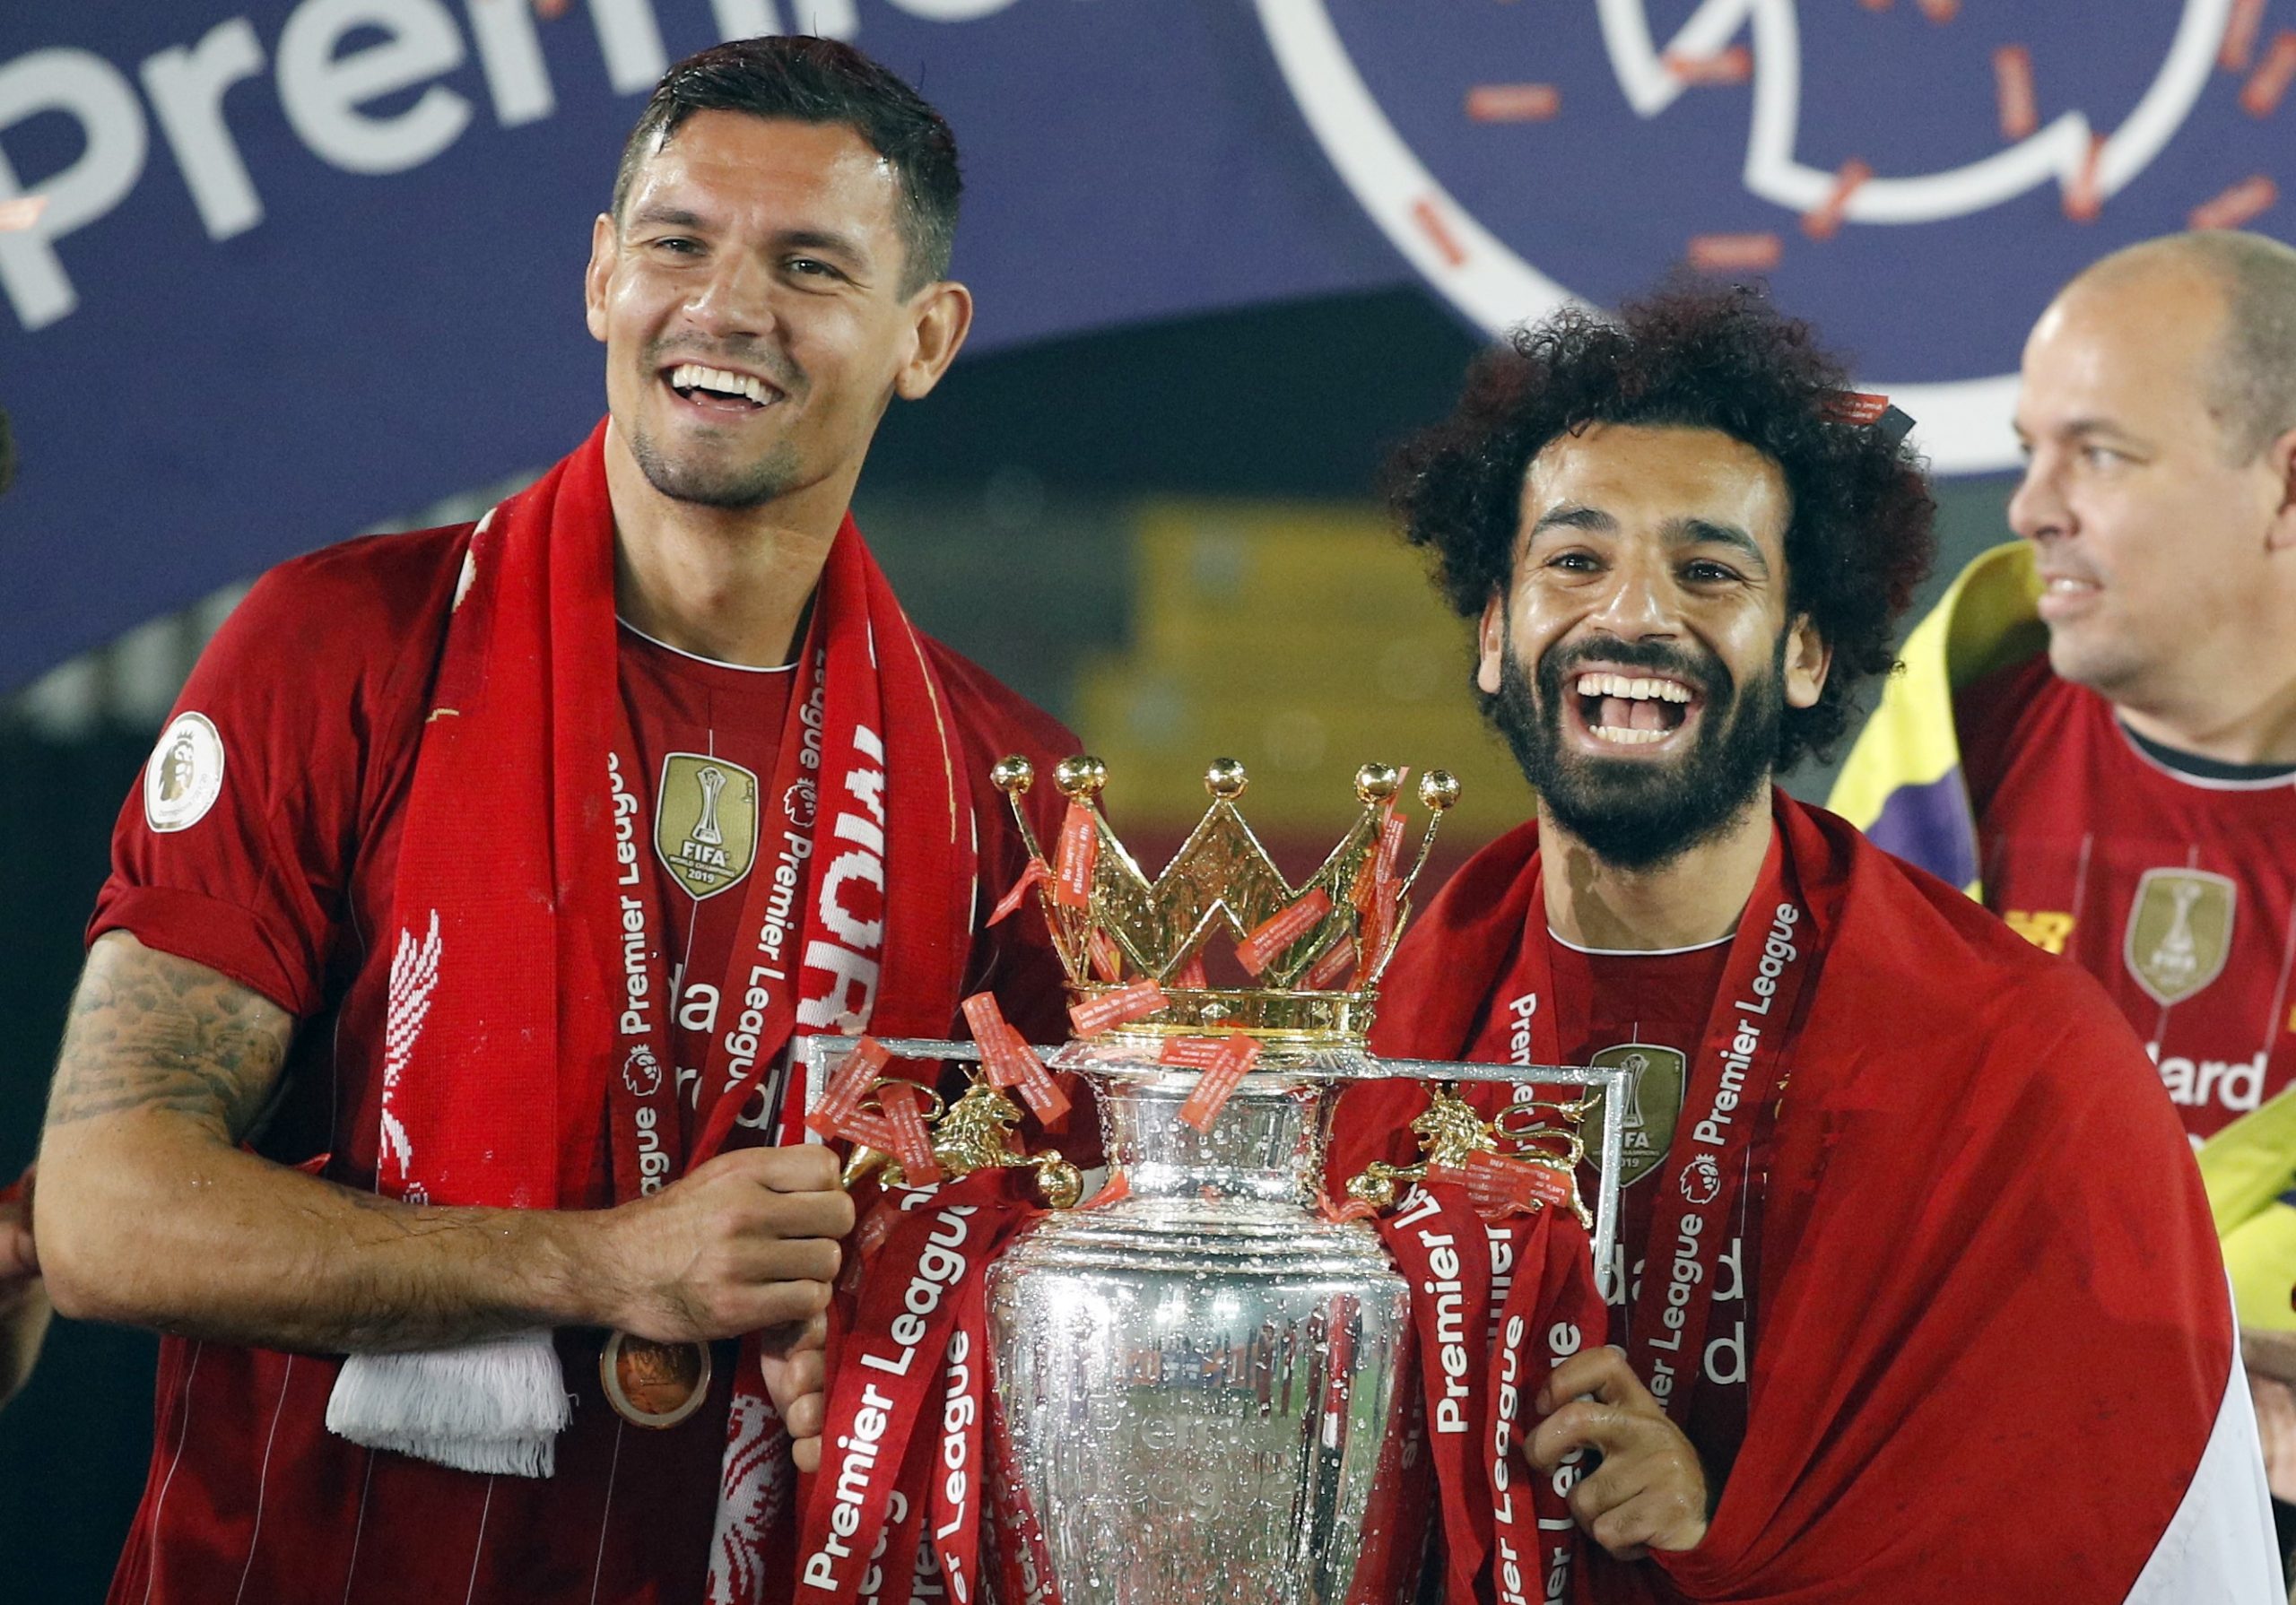 epa08562321 Liverpool's Dejan Lovren (L) and Mohamed Salah celebrate the Premier League title following the English Premier League soccer match between Liverpool FC and Chelsea FC in Liverpool, Britain, 22 July 2020.  EPA/Phil Noble/NMC/Pool EDITORIAL USE ONLY. No use with unauthorized audio, video, data, fixture lists, club/league logos or 'live' services. Online in-match use limited to 120 images, no video emulation. No use in betting, games or single club/league/player publications.